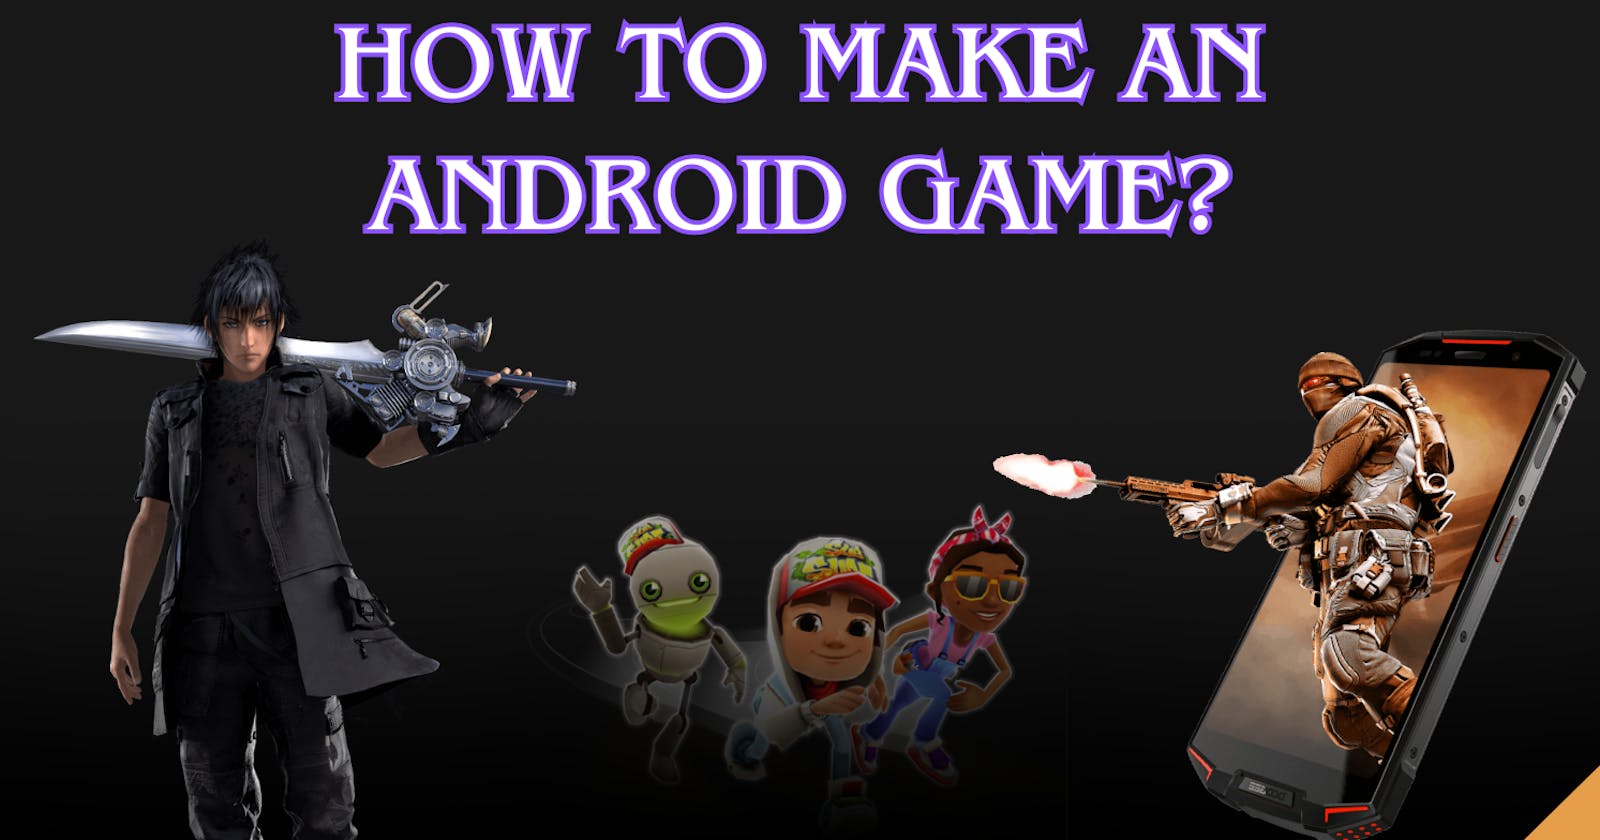 How to Make an Android Game?